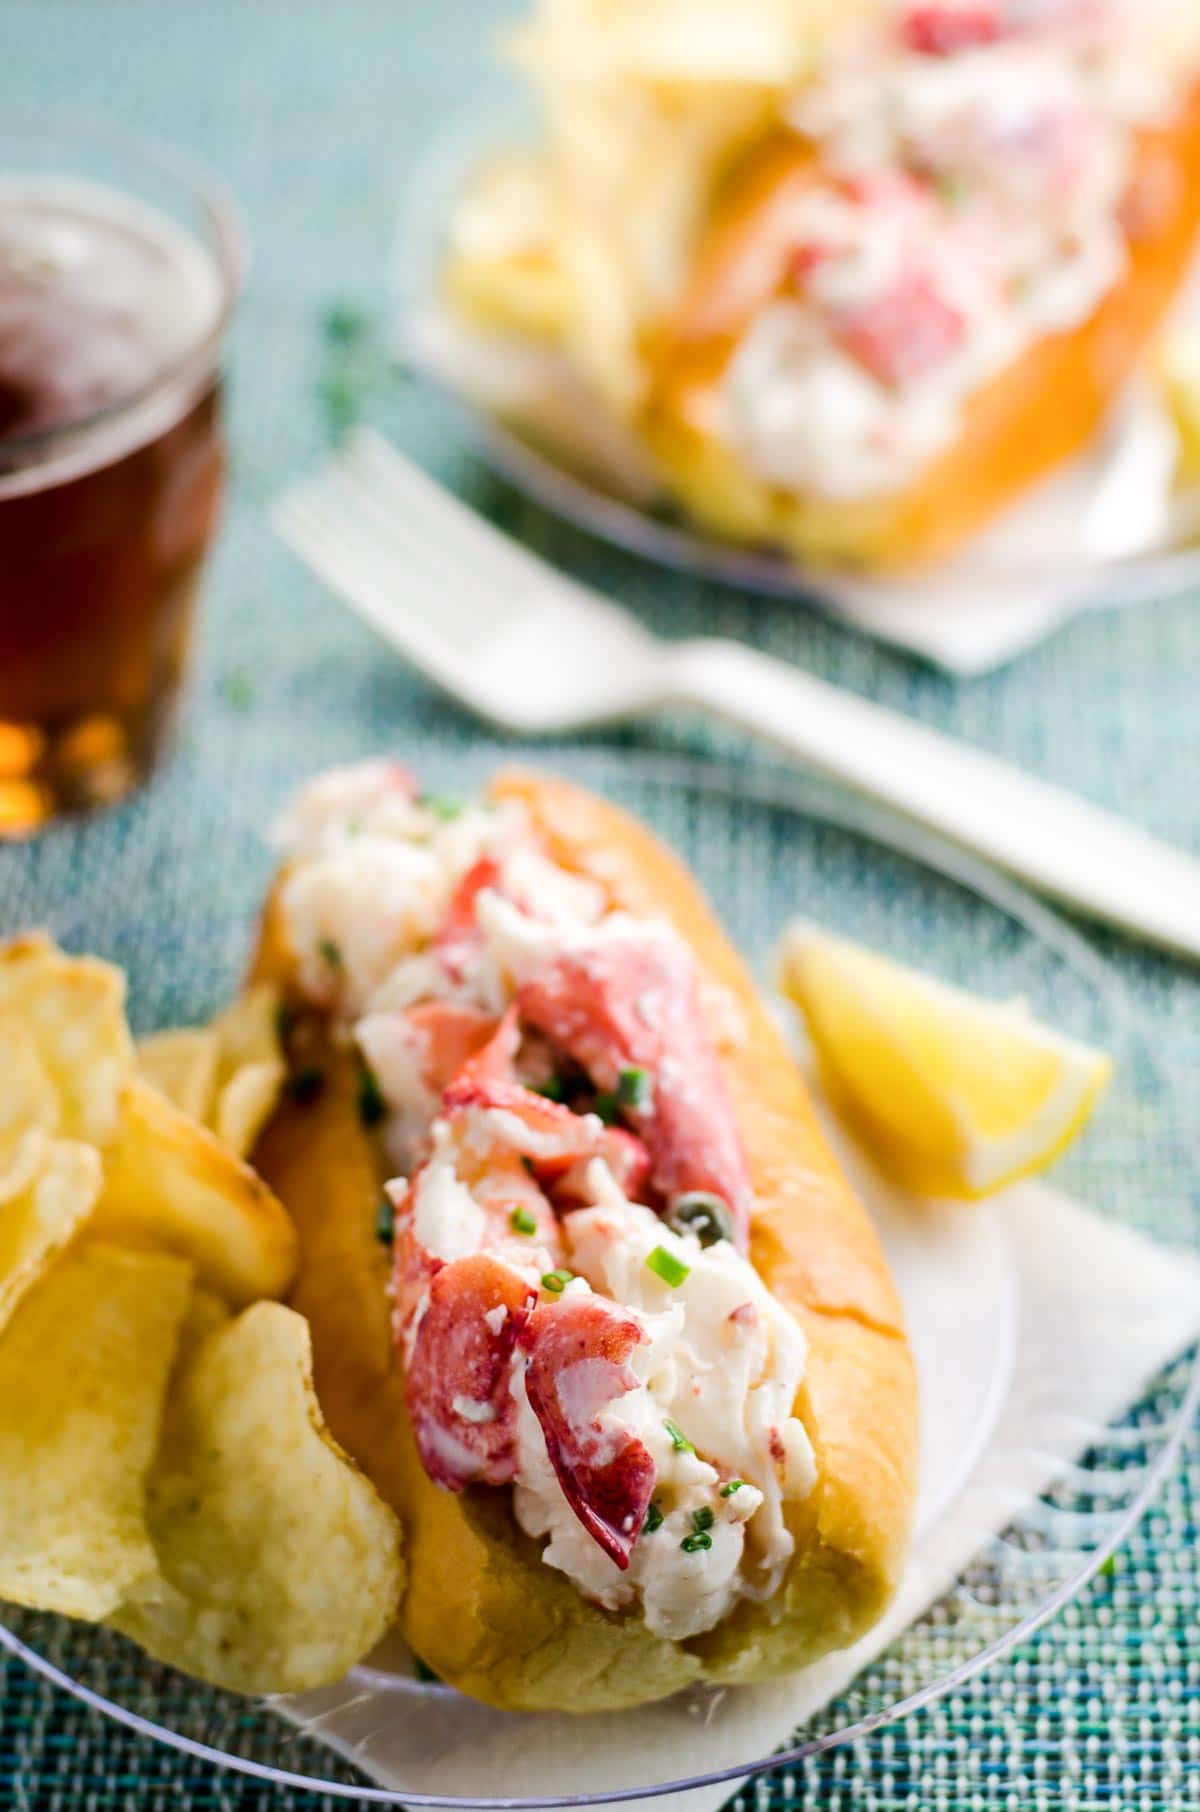 Best Lobster Roll Recipe: How to Make a Lobster Roll